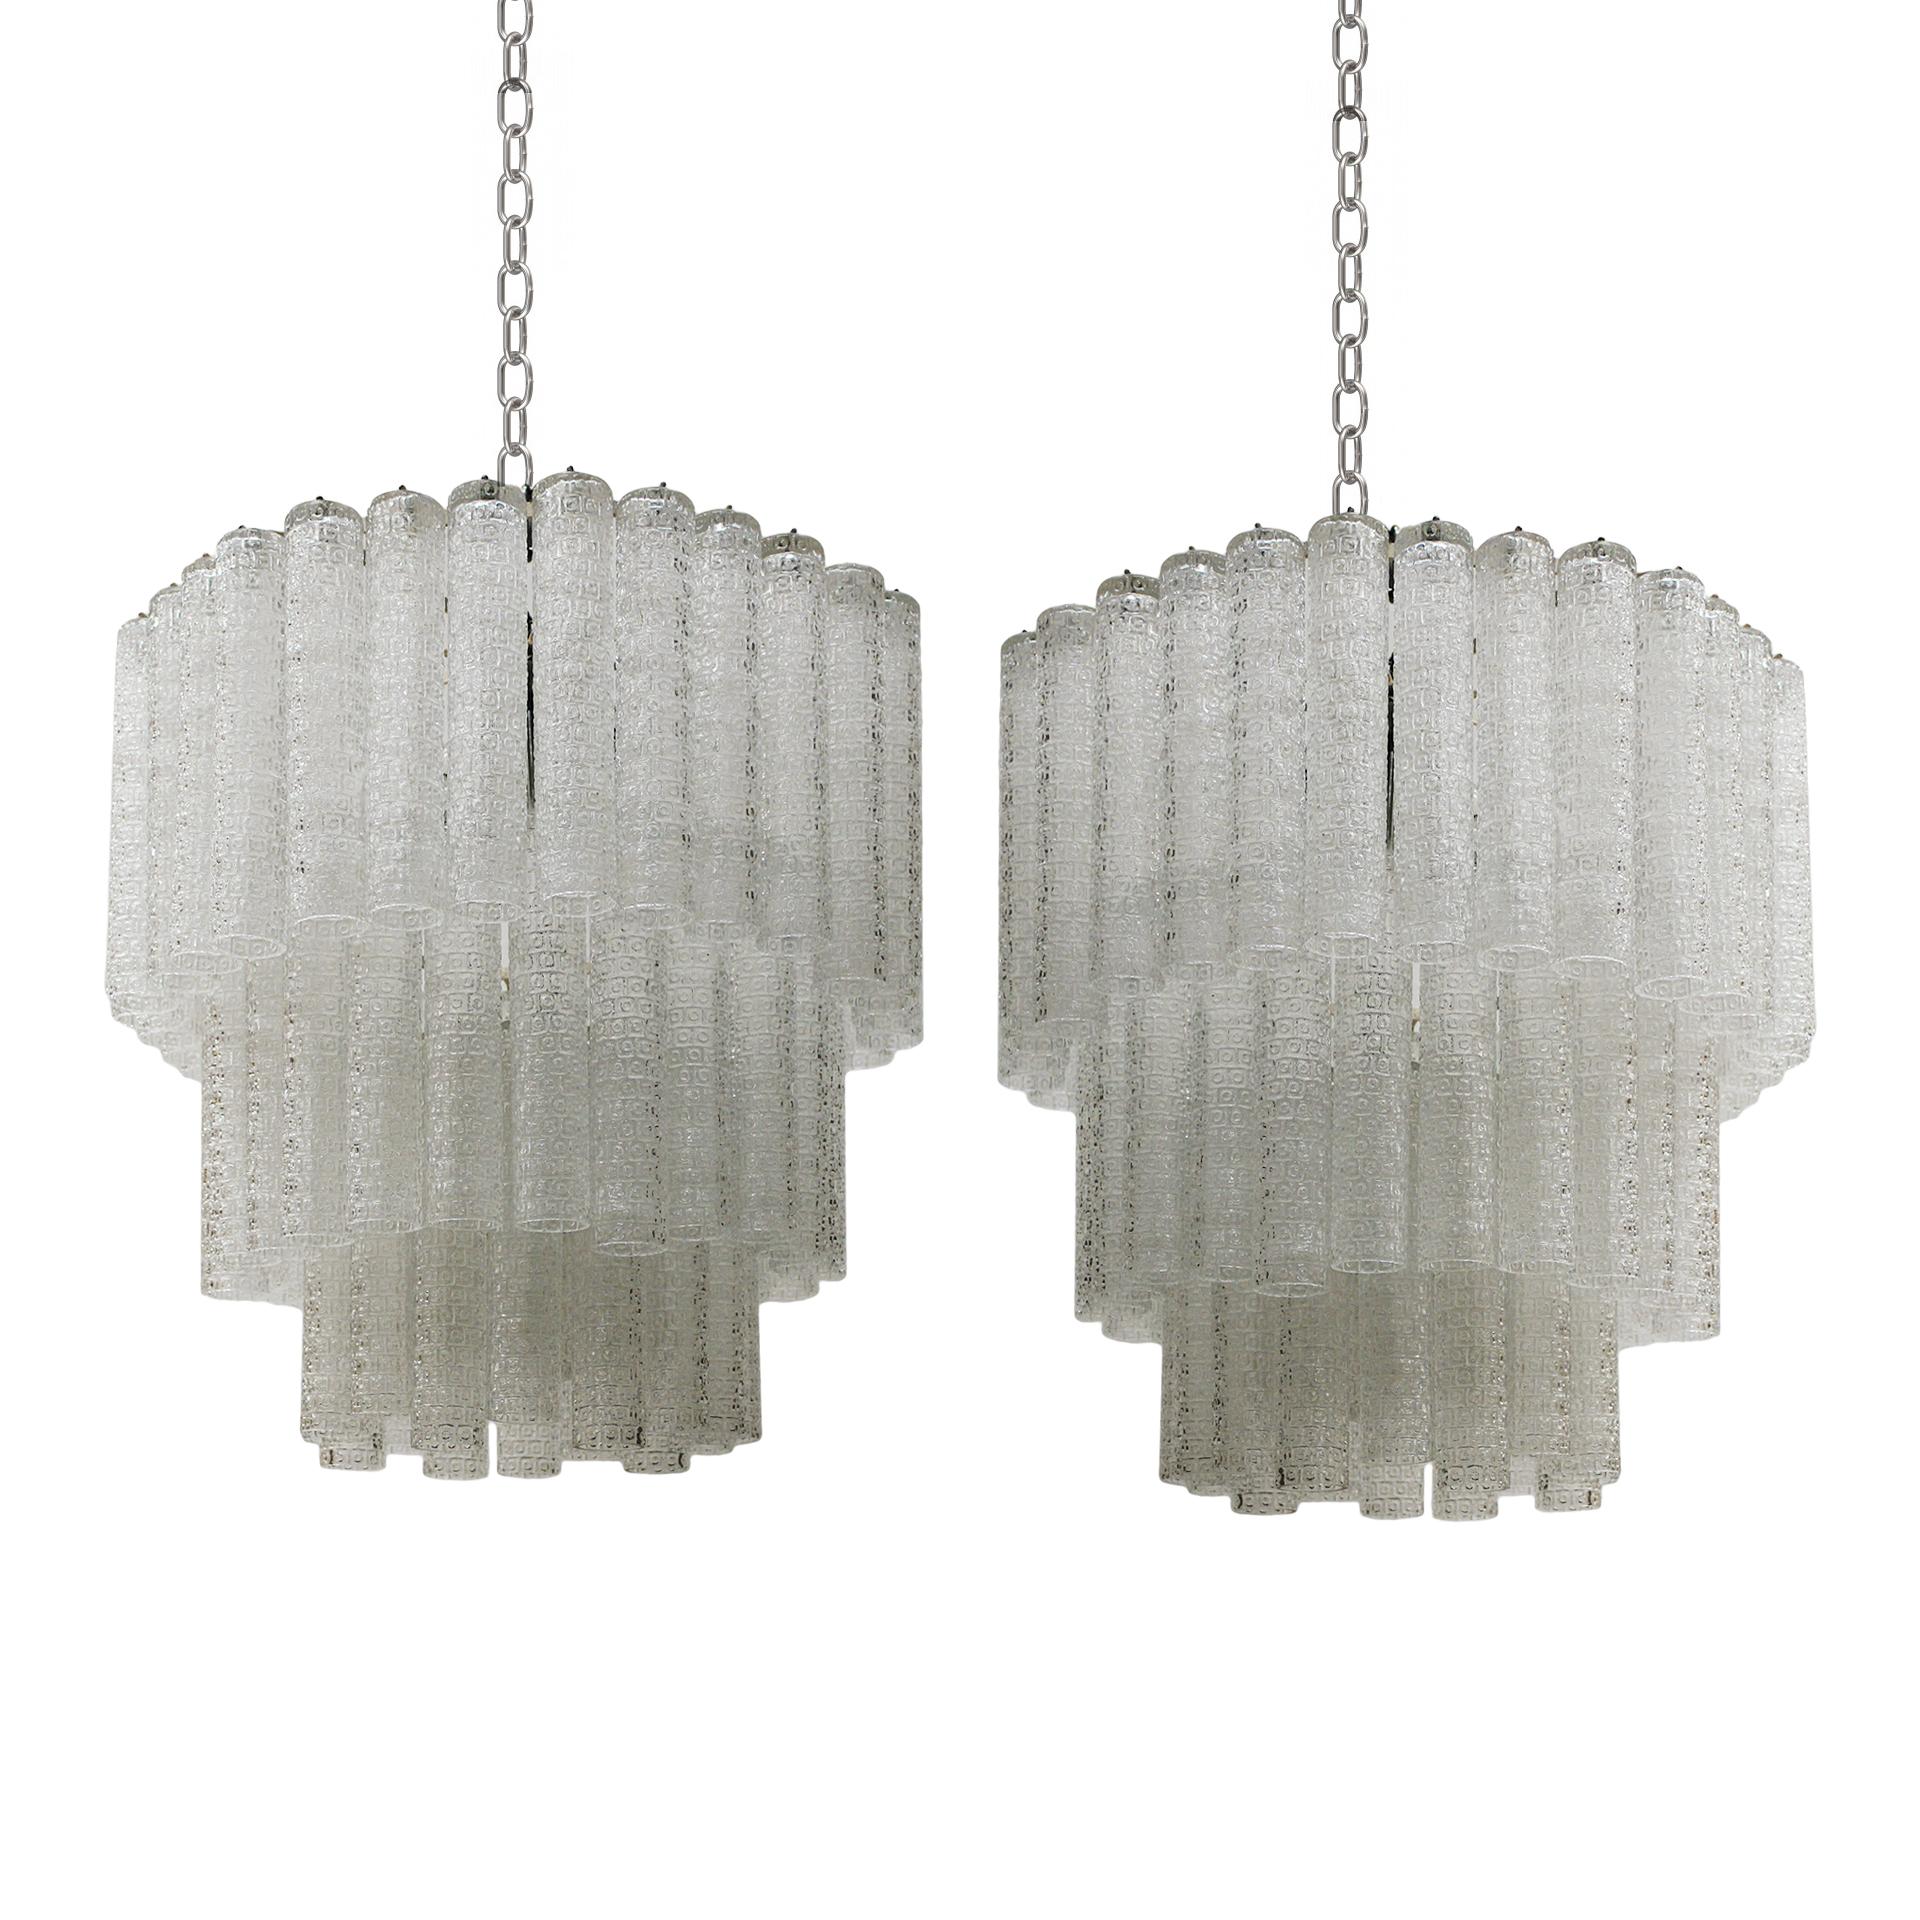 Pair of italian lamps edited by Venini. Composed of 5 light points and made of Murano glass. 1950s.

Introducing stunning mid-century-inspired lamps, handcrafted with molded glass, capturing the timeless beauty of the 1950s. These meticulously